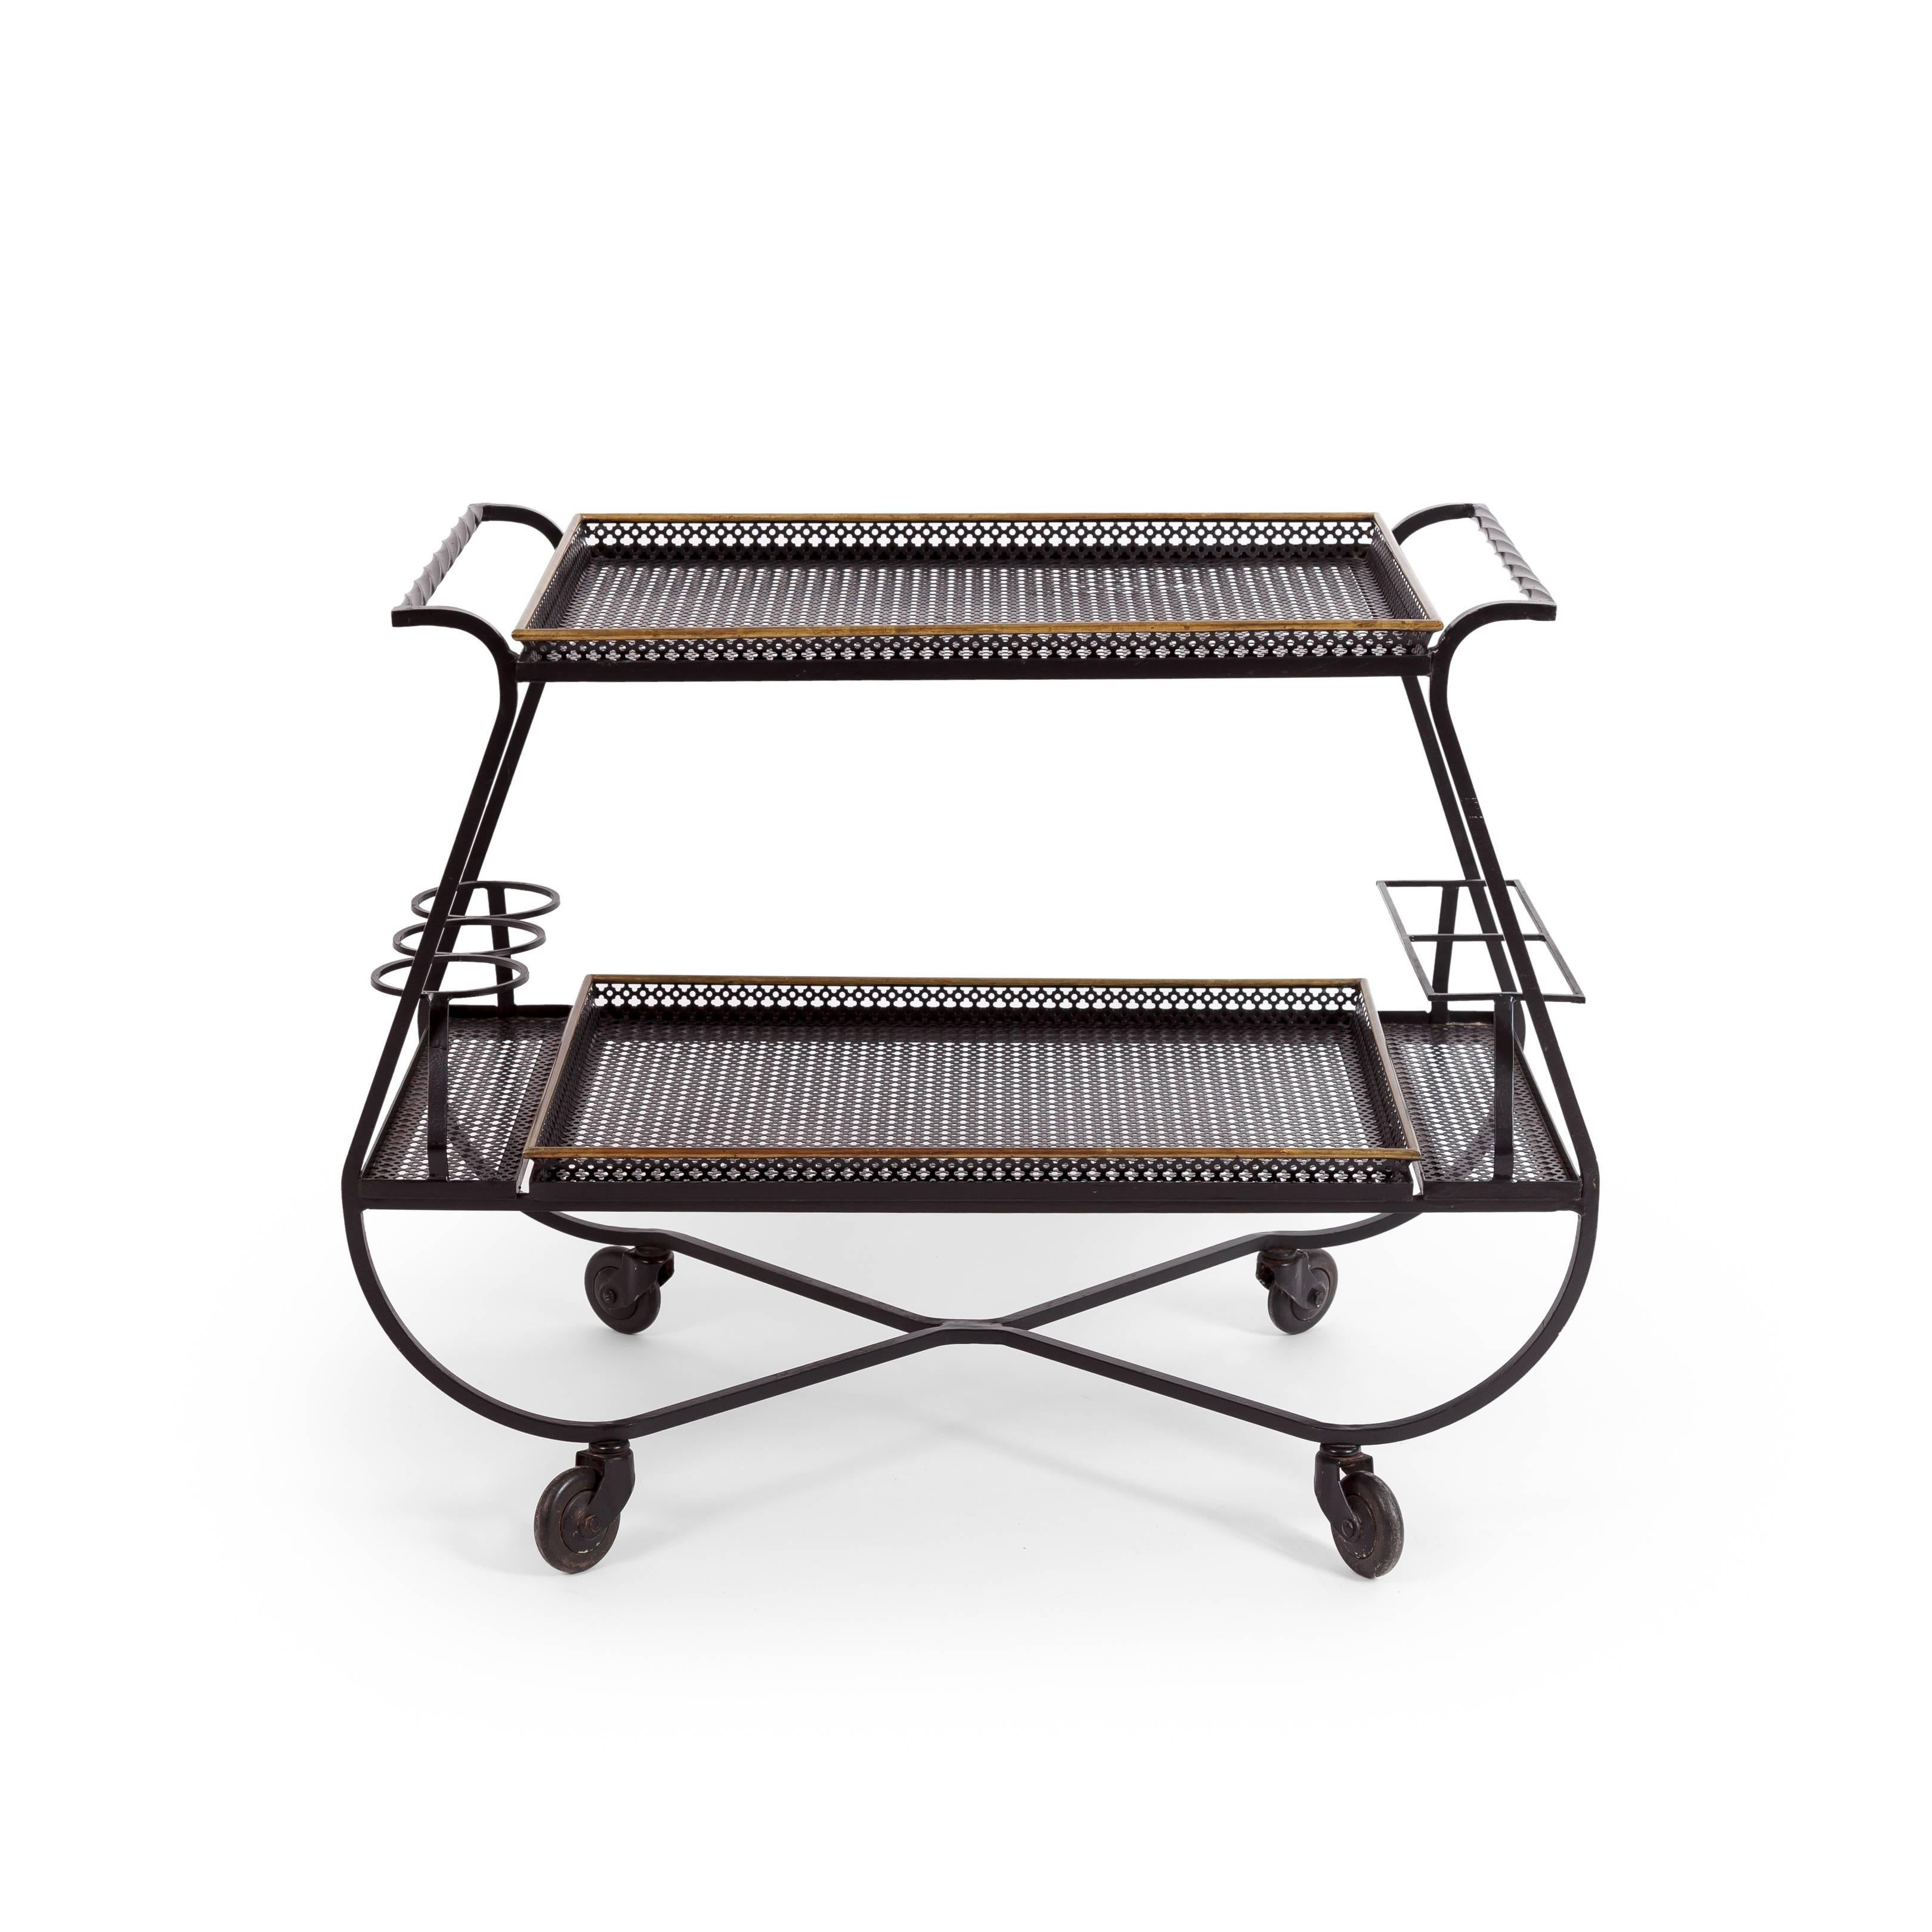 Mathieu Matégot chic and rare bar cart with elegantly curved black enameled and quadrifoil perforated metal tops, France, 1950s.
The top and bottom have removable trays with elegant brass details.

Literature: 
Patrick Favardin, Mathieu Matégot,